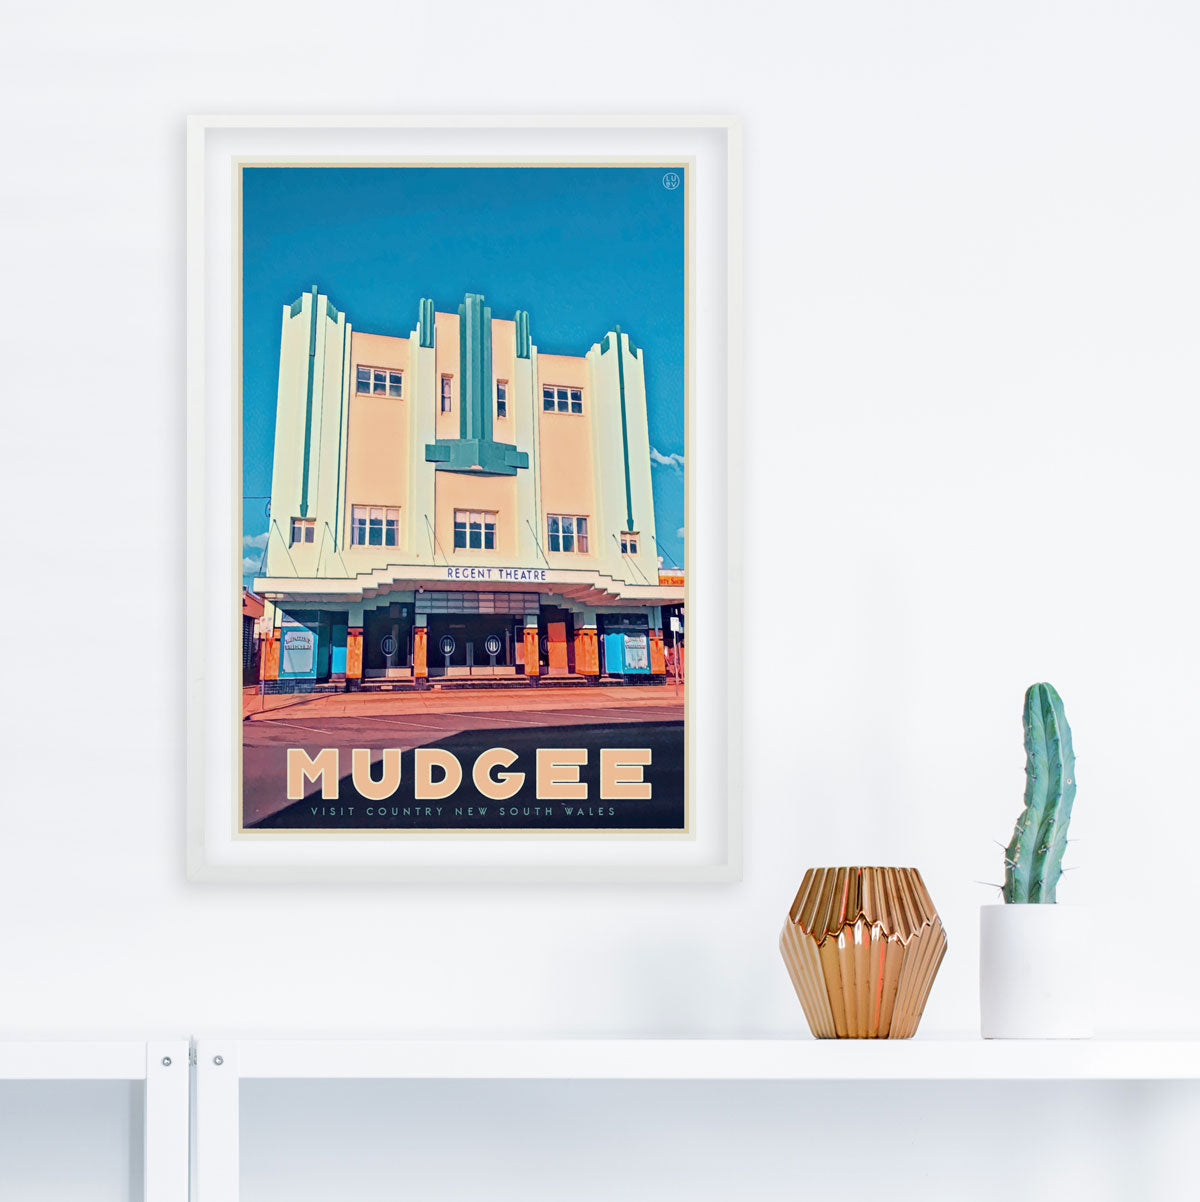 Mudgee vintage travel framed poster central west by places we luv